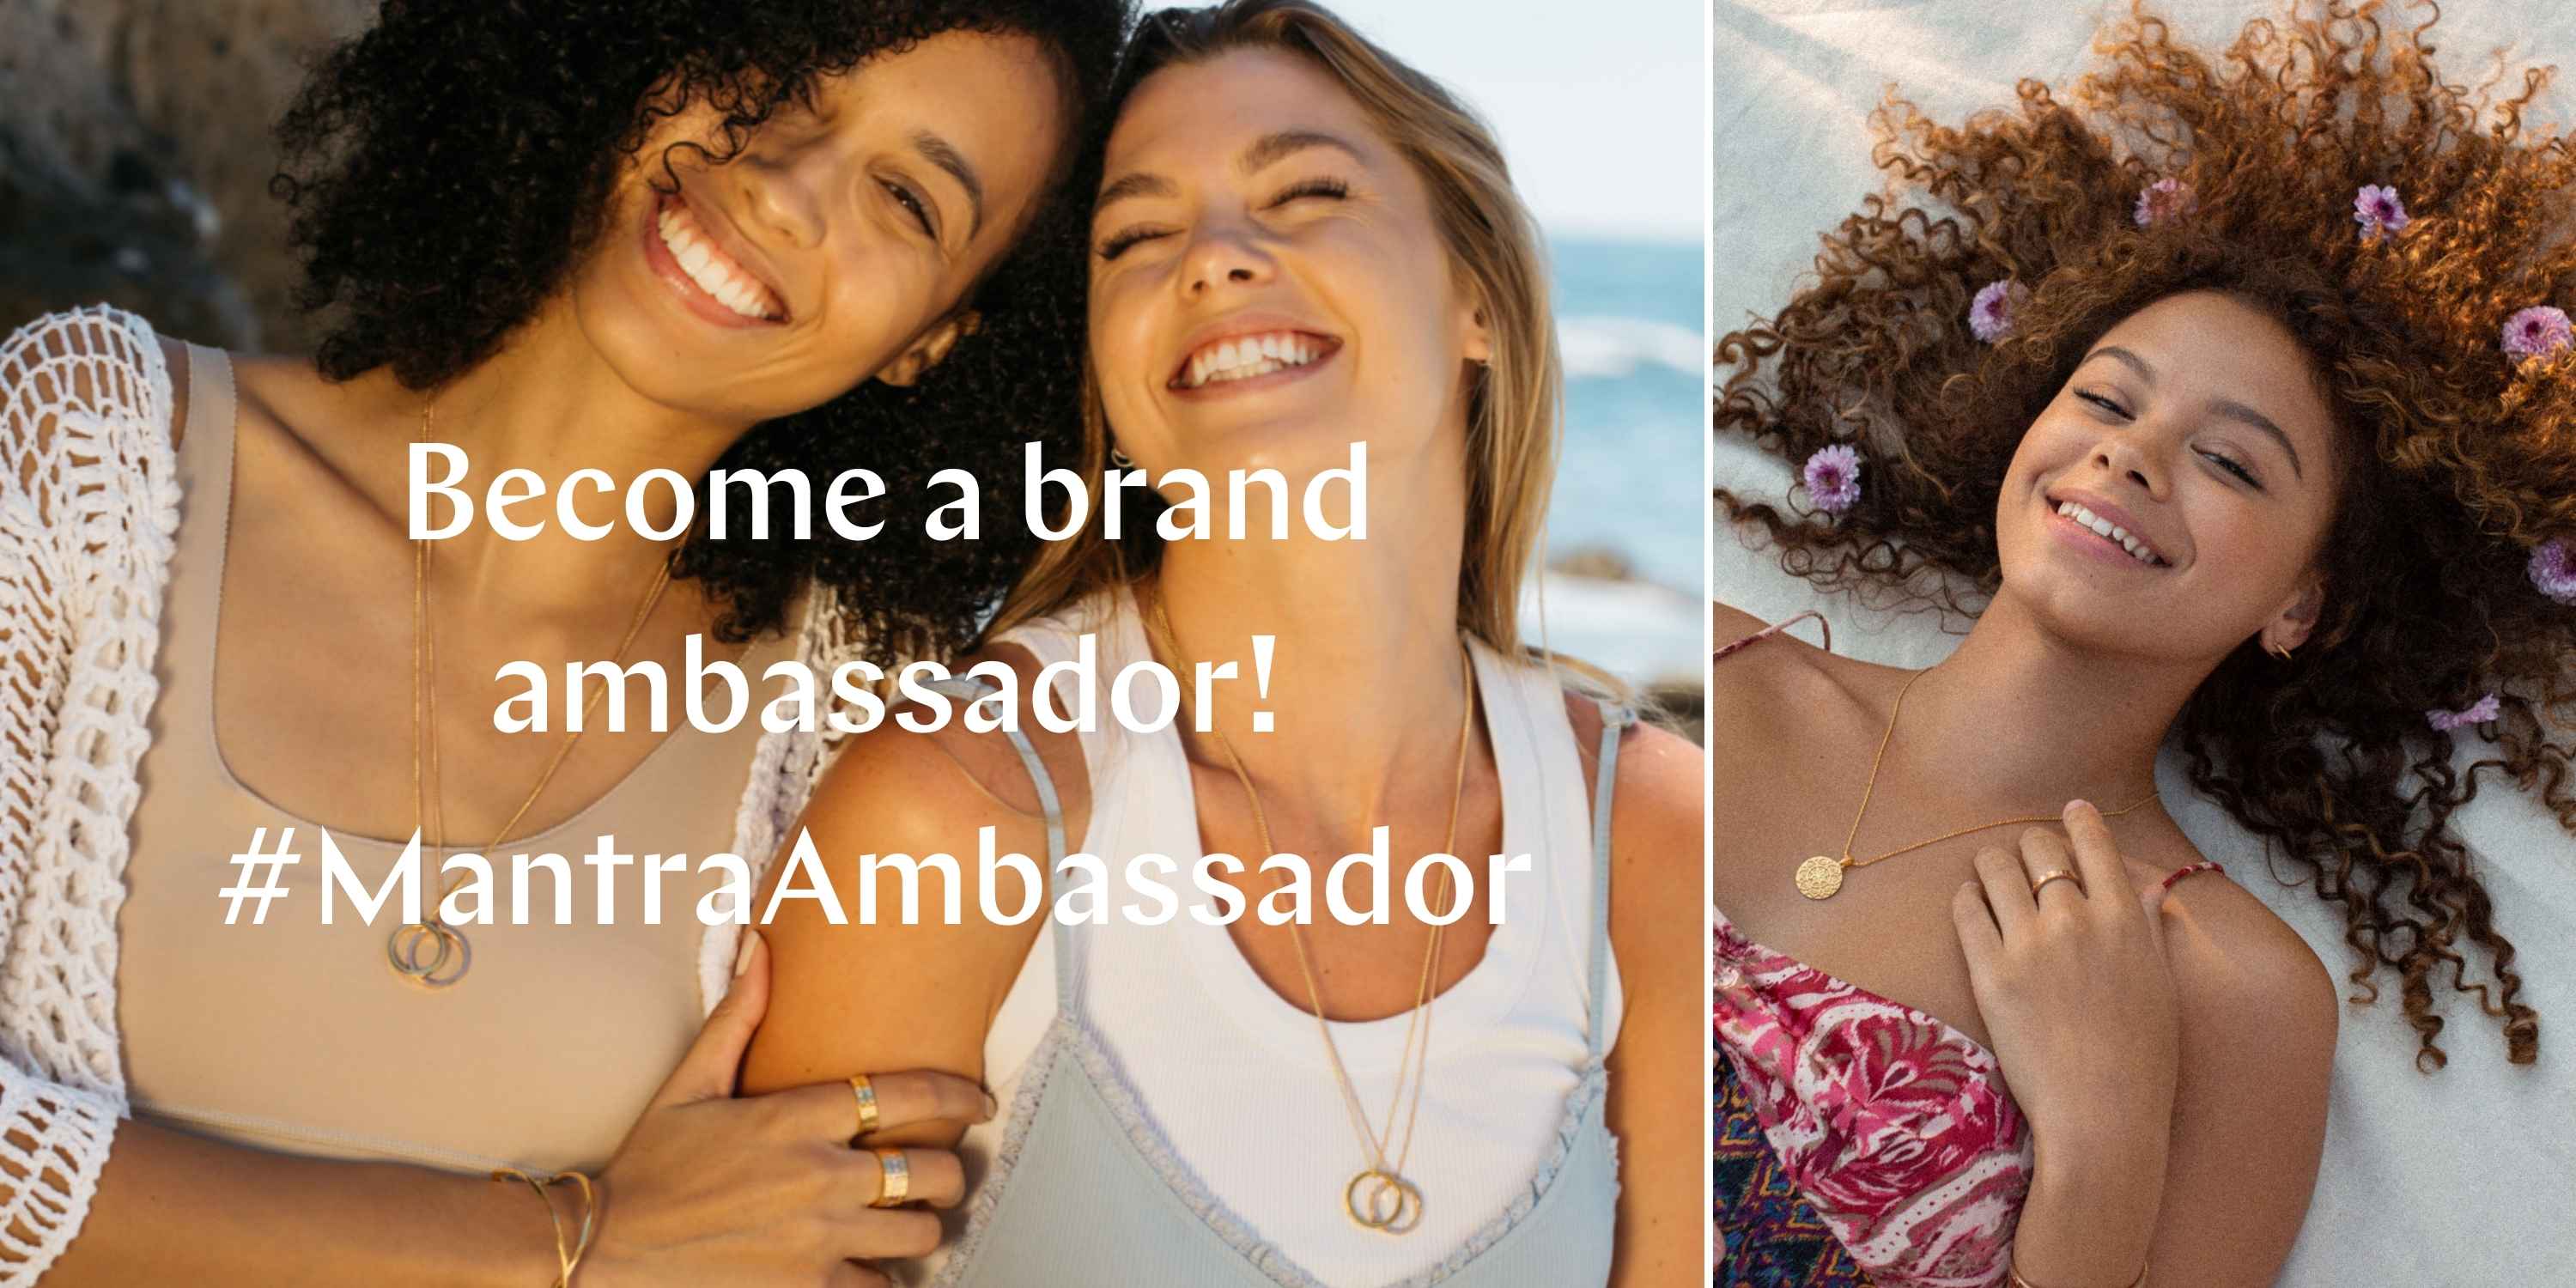 Become a brand ambassador #MantraAmbassador. Two Mantra Ambassadors are smiling in this image wearing their inspirational MantraBand jewelry.